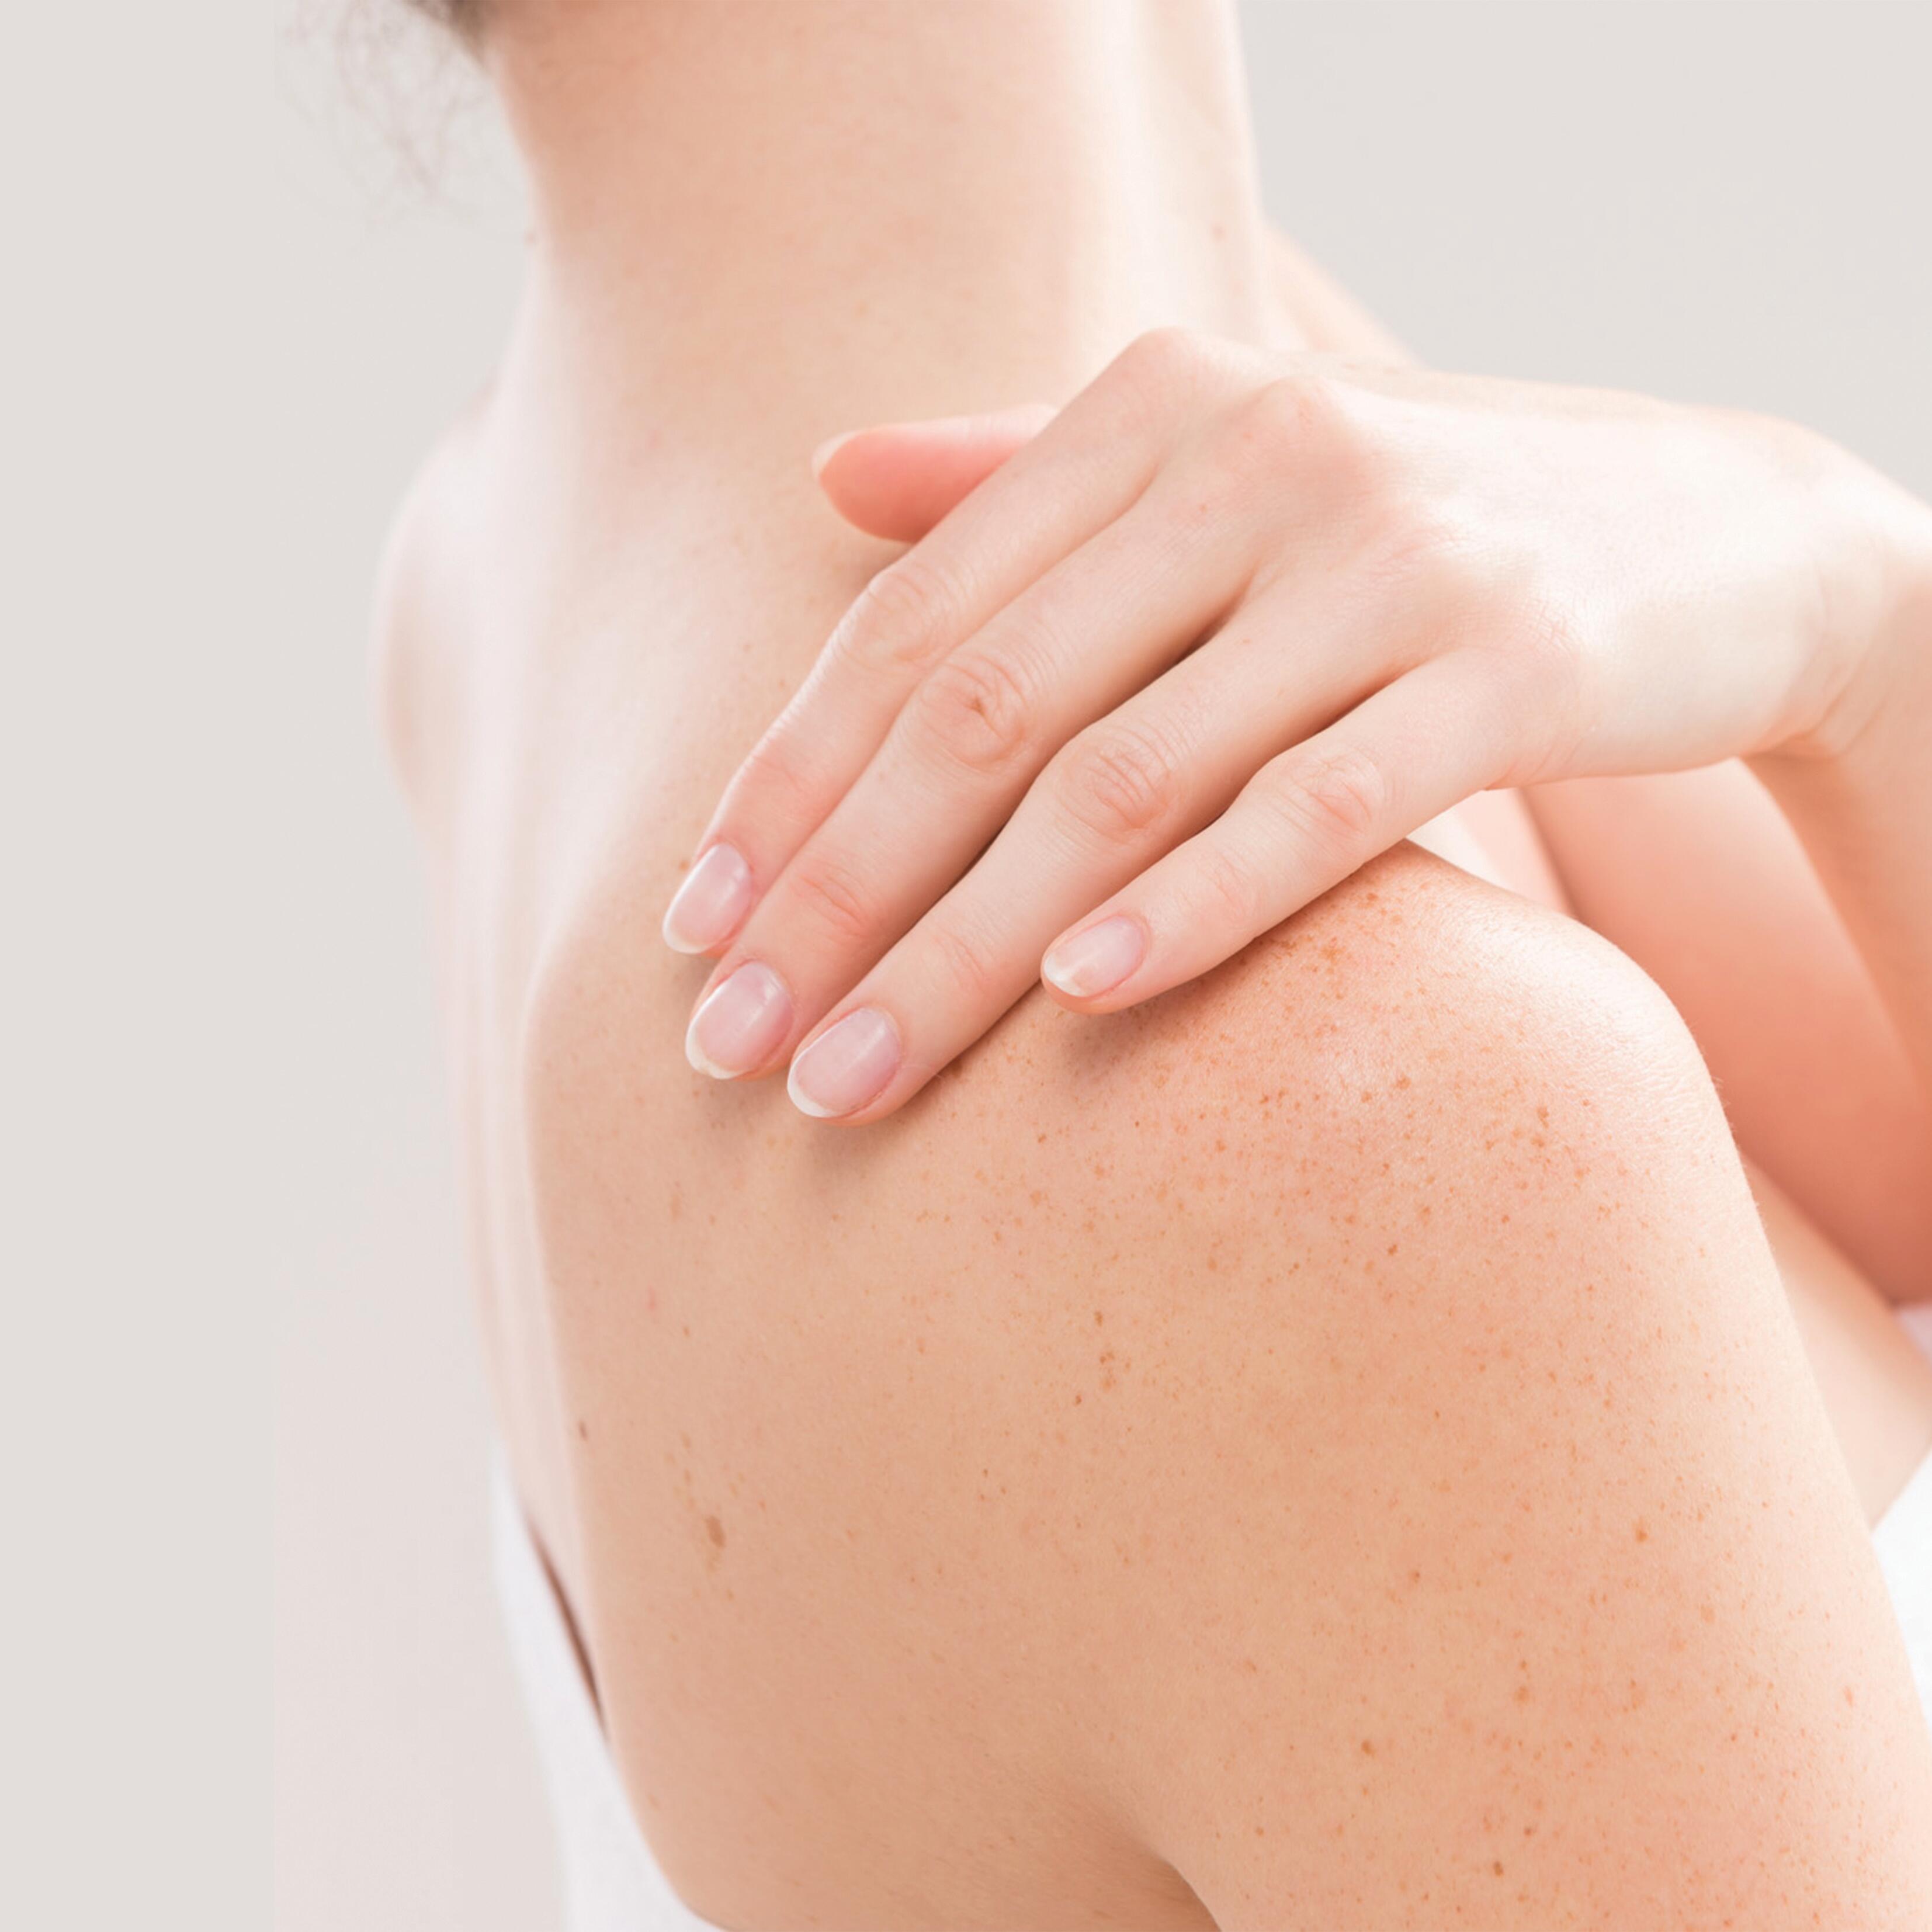 AD_PAINFUL-SKIN_WOMAN-HAND-SHOULDER_LARGE_2021 500x500